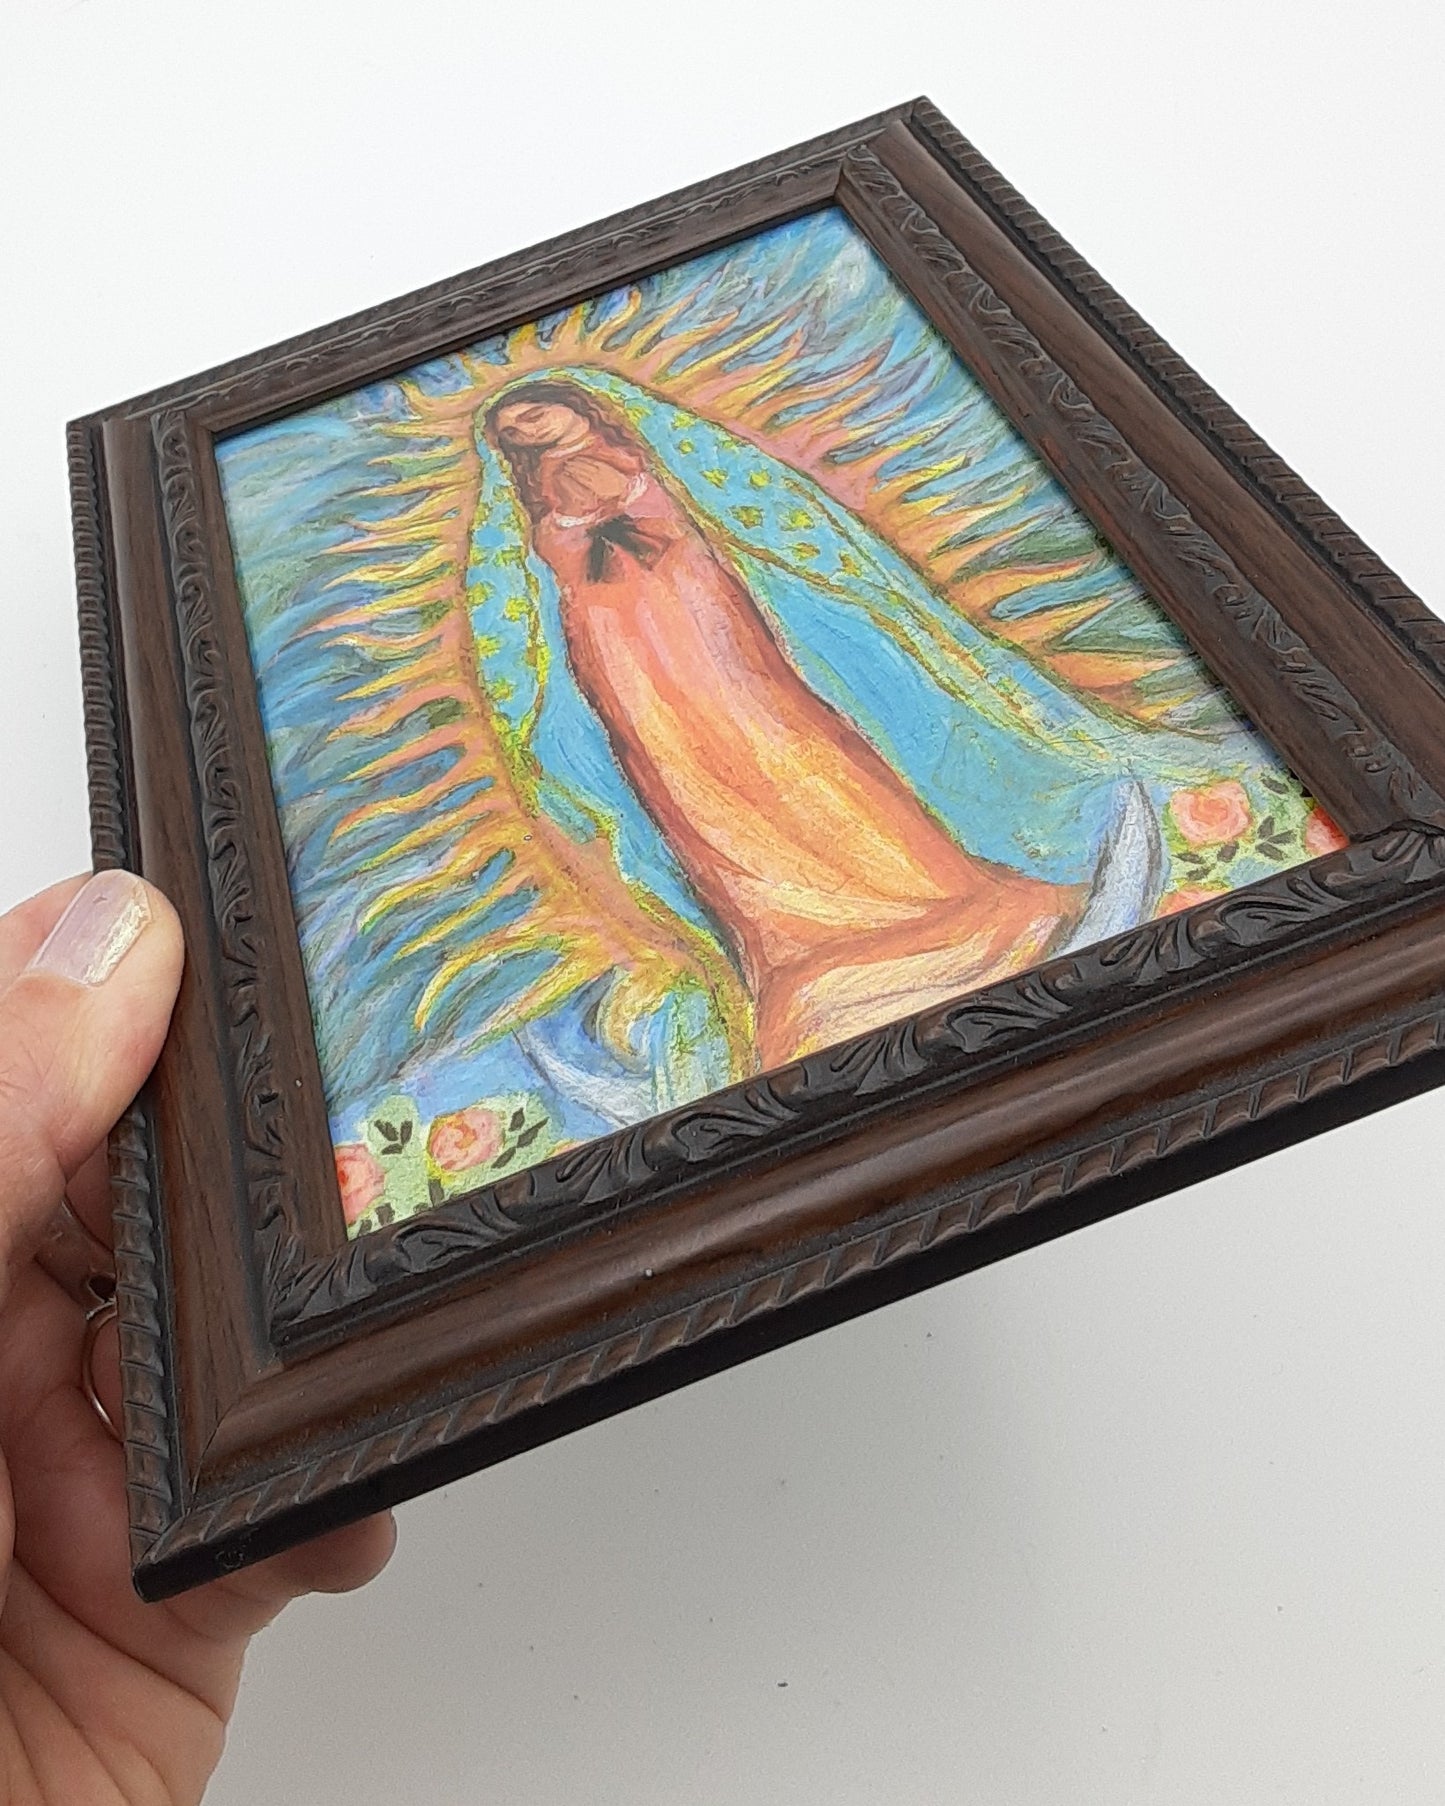 Lady of Guadalupe Framed Postcard